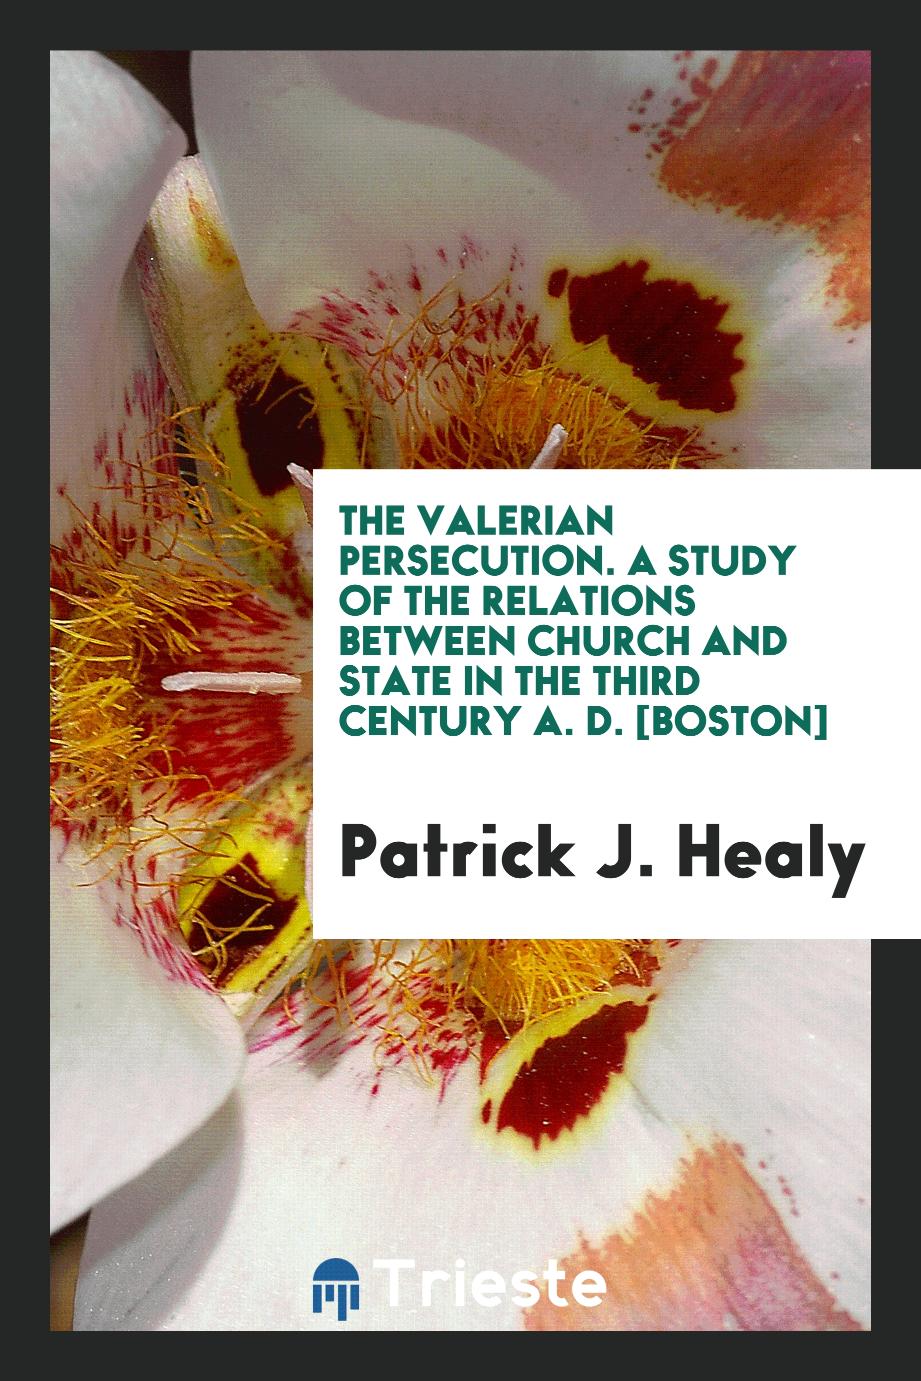 The Valerian Persecution. A Study of the Relations Between Church and State in the Third Century A. D. [Boston]